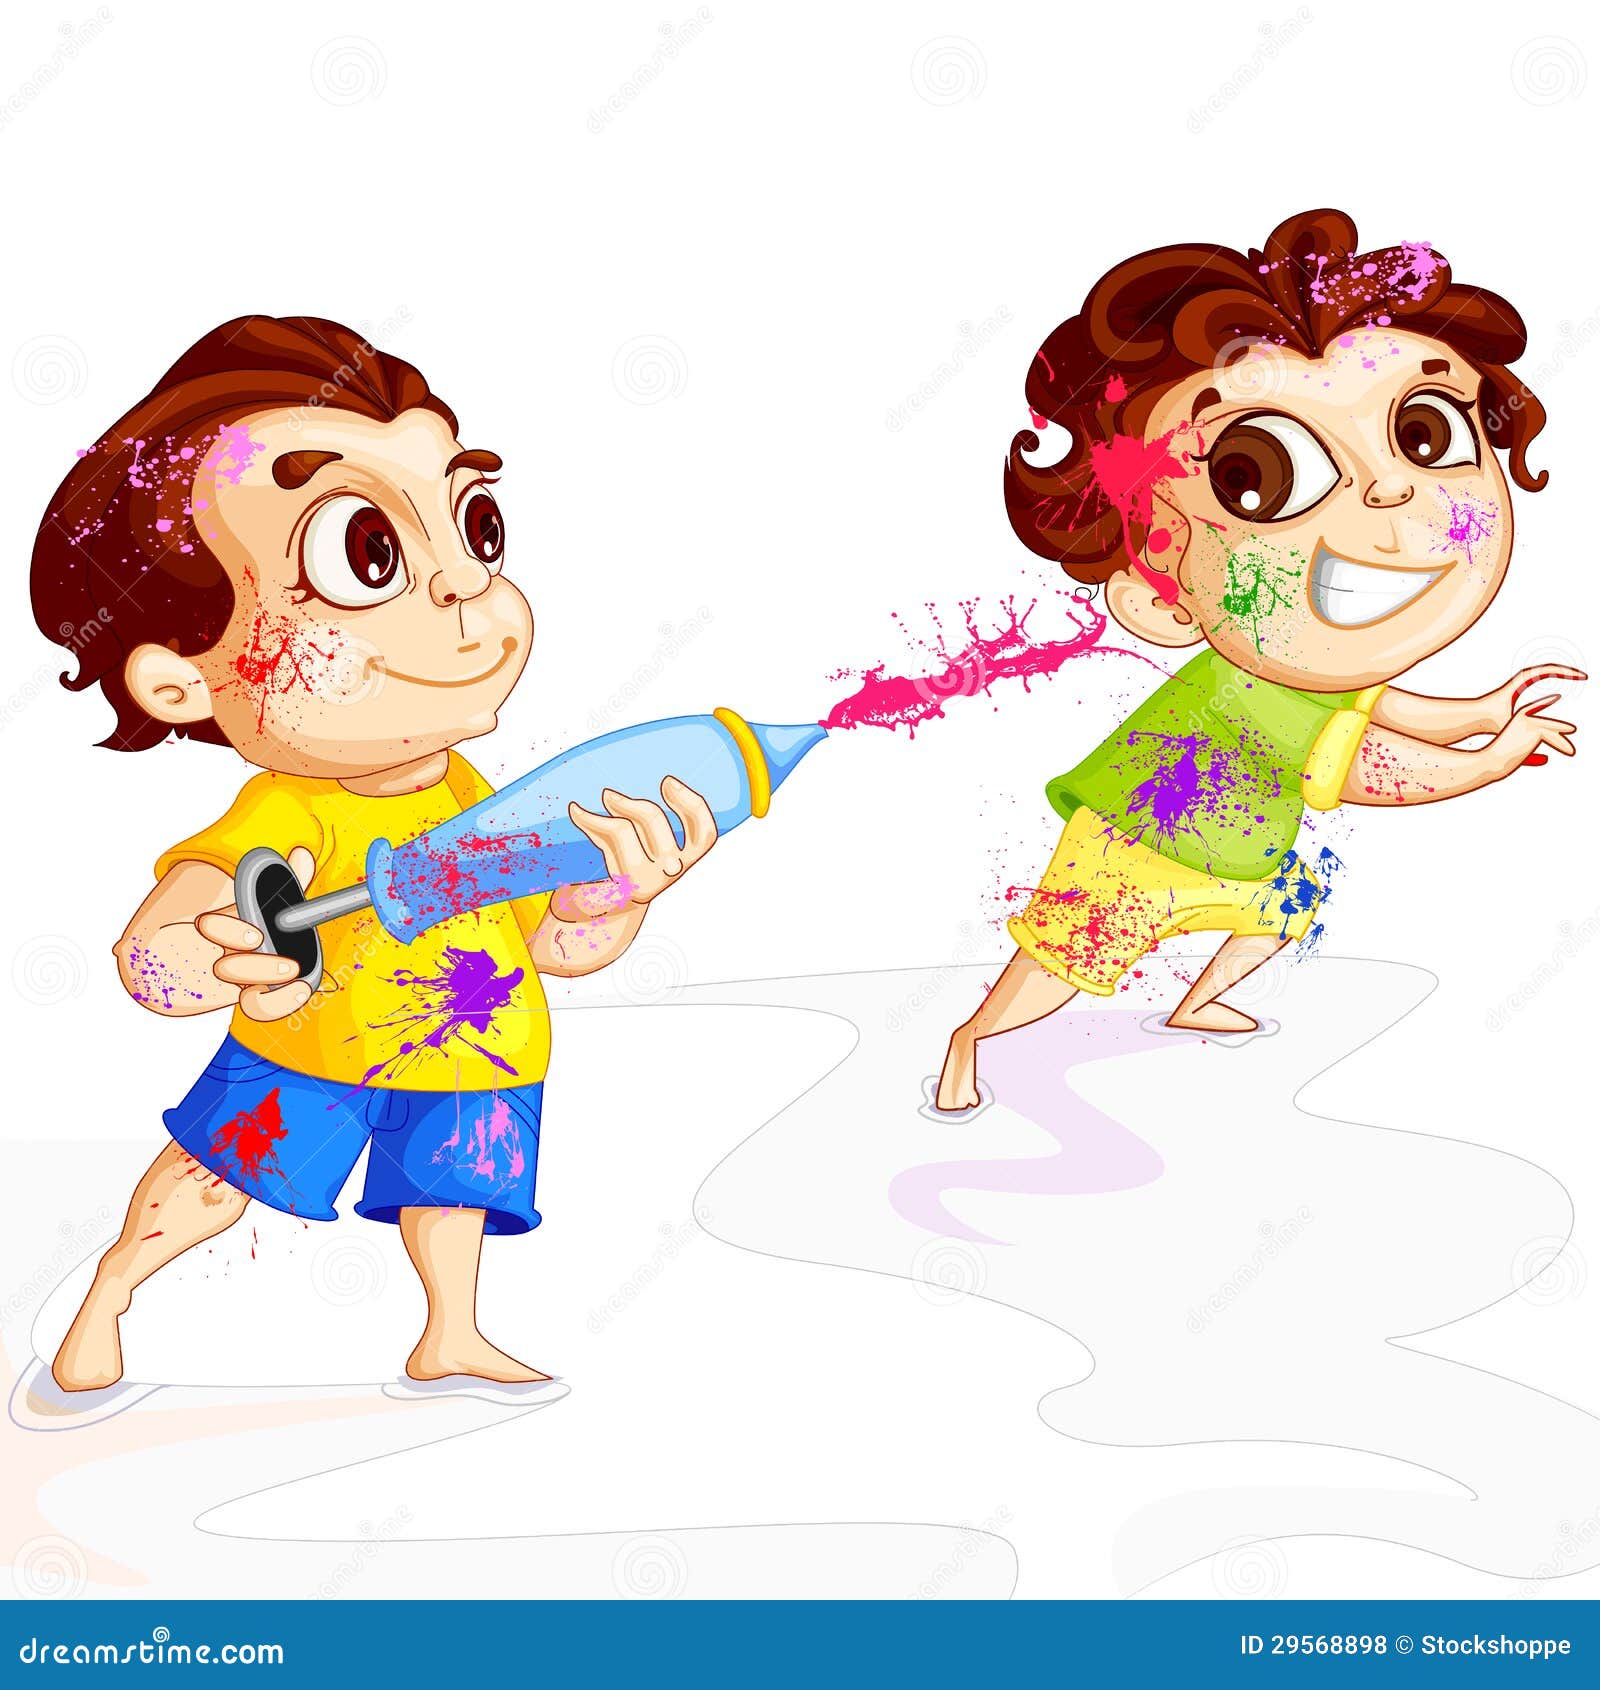 Face Holi Stock Illustrations 119 Face Holi Stock Illustrations Vectors Clipart Dreamstime For an overview of the holiday and some ideas to get you started don't miss our post on celebrating holi. dreamstime com